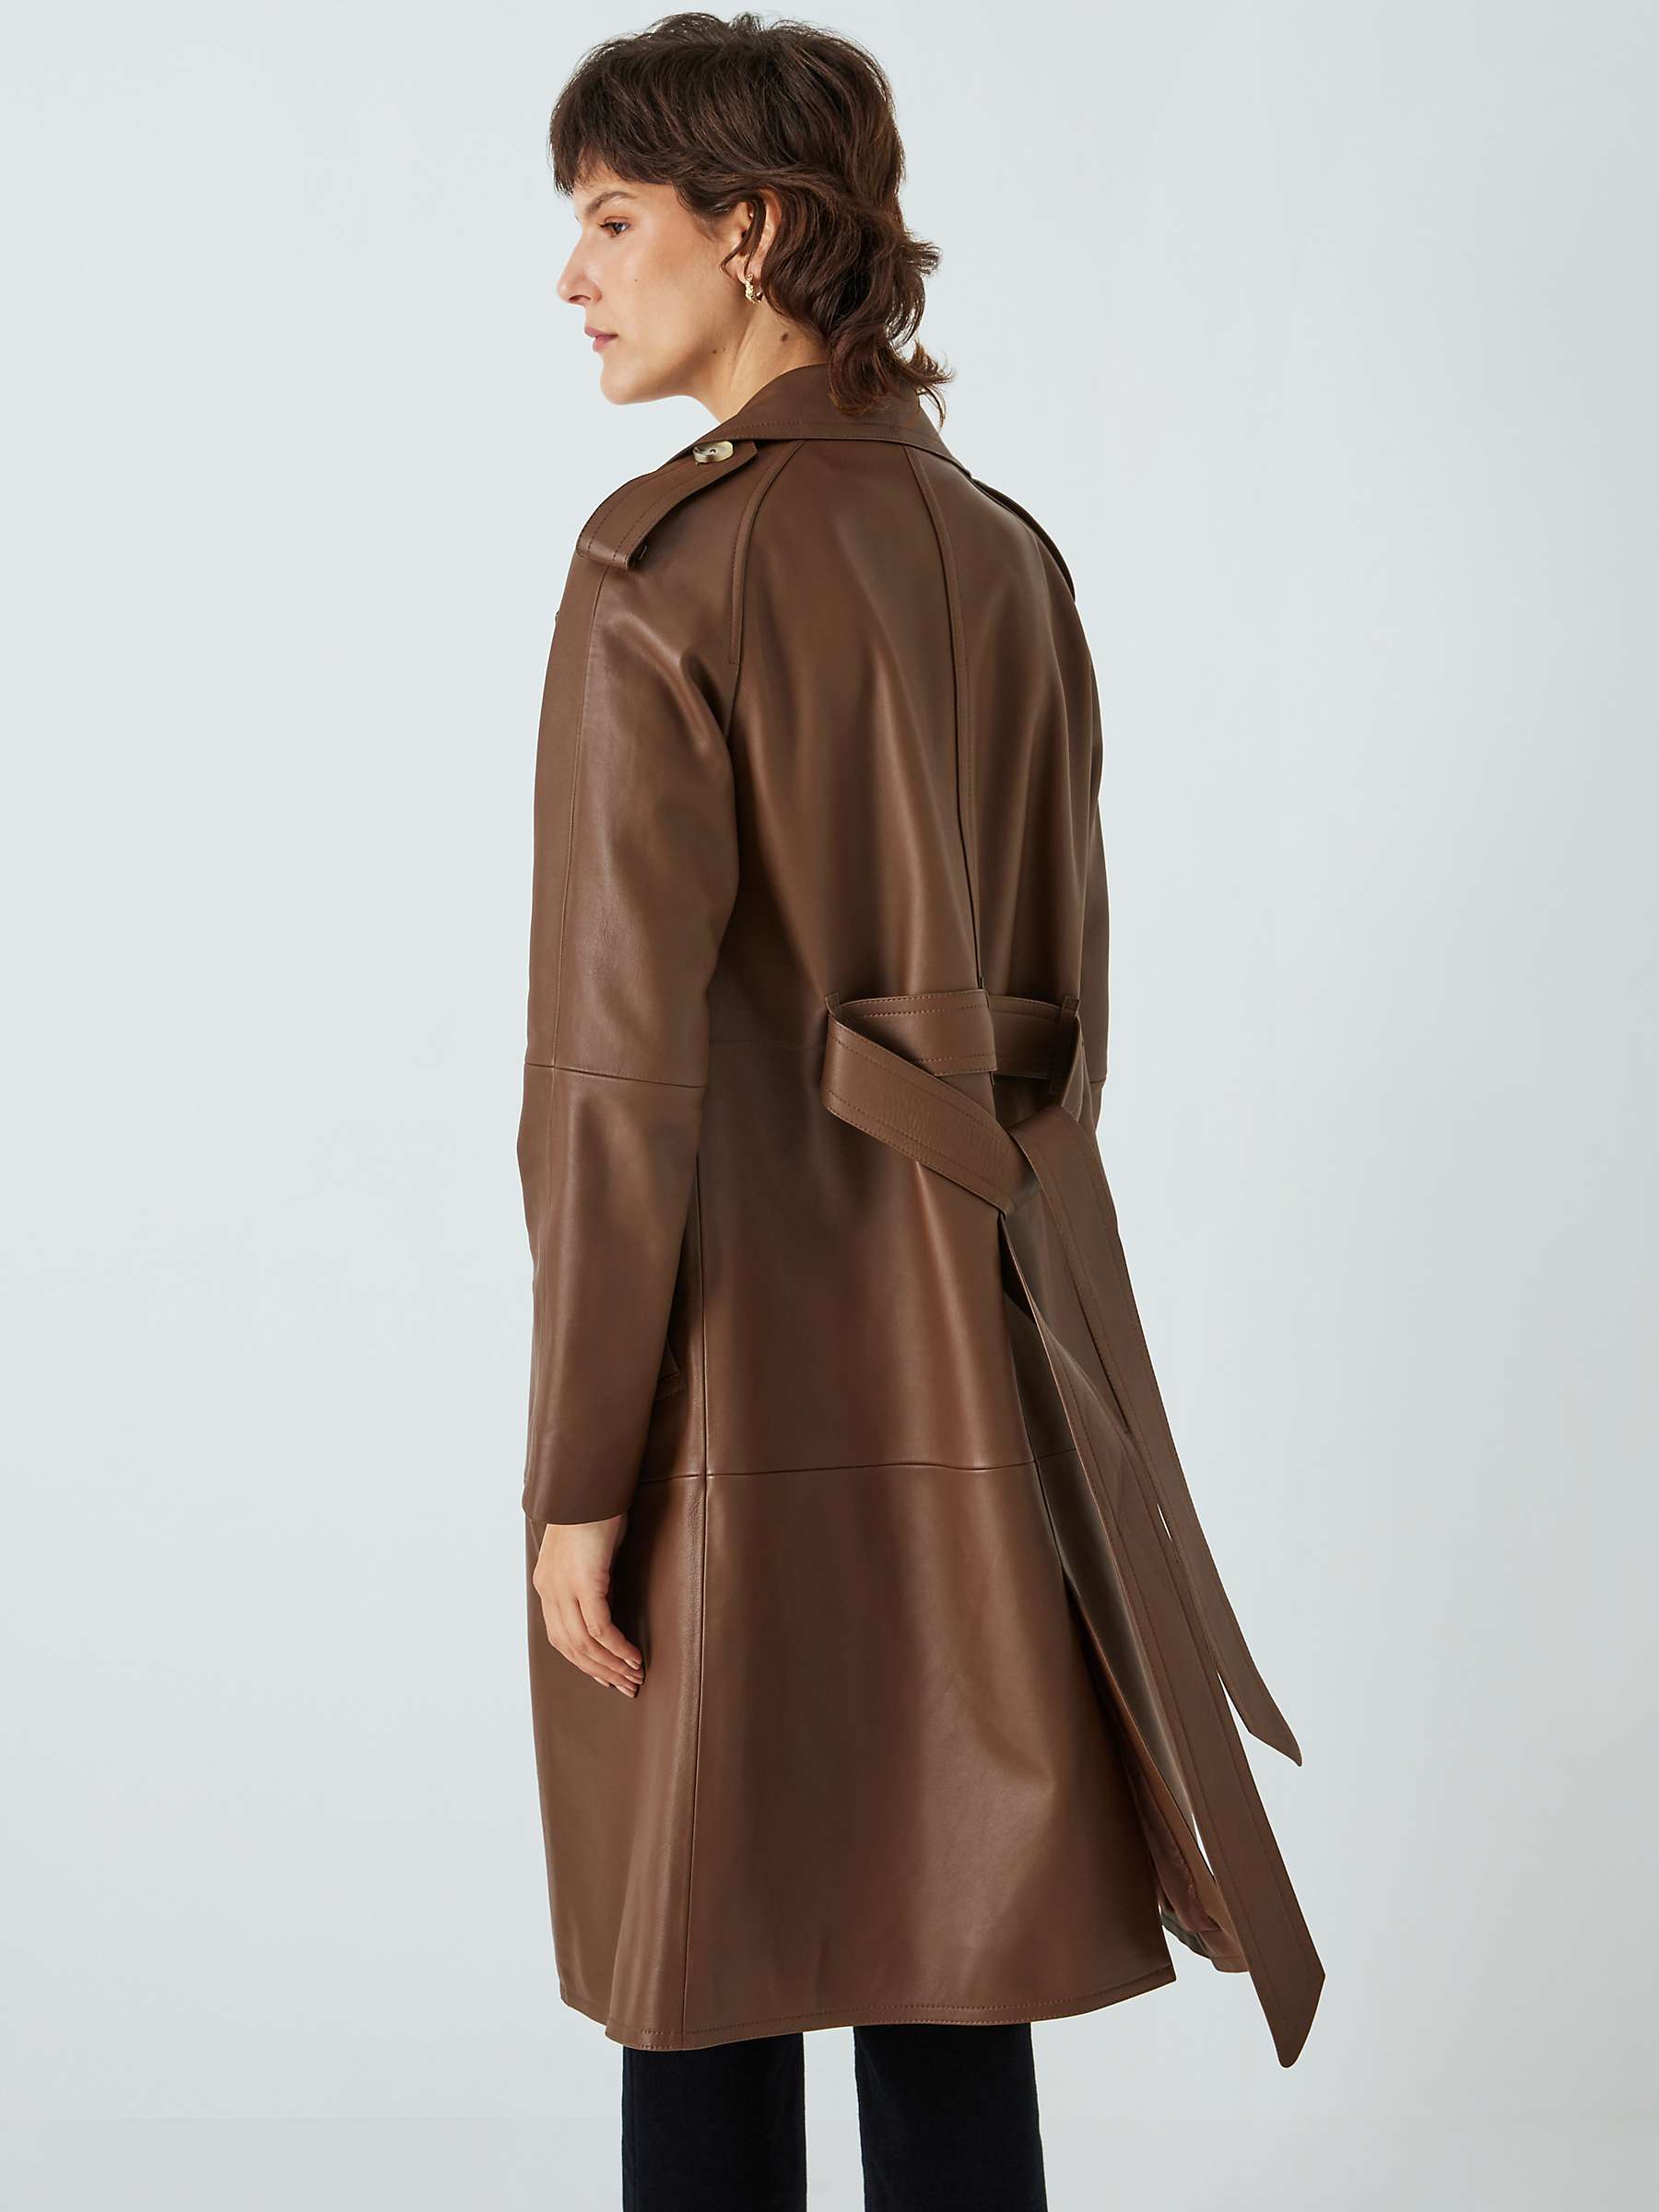 Buy John Lewis Leather Trench Coat, Tobacco Brown Online at johnlewis.com